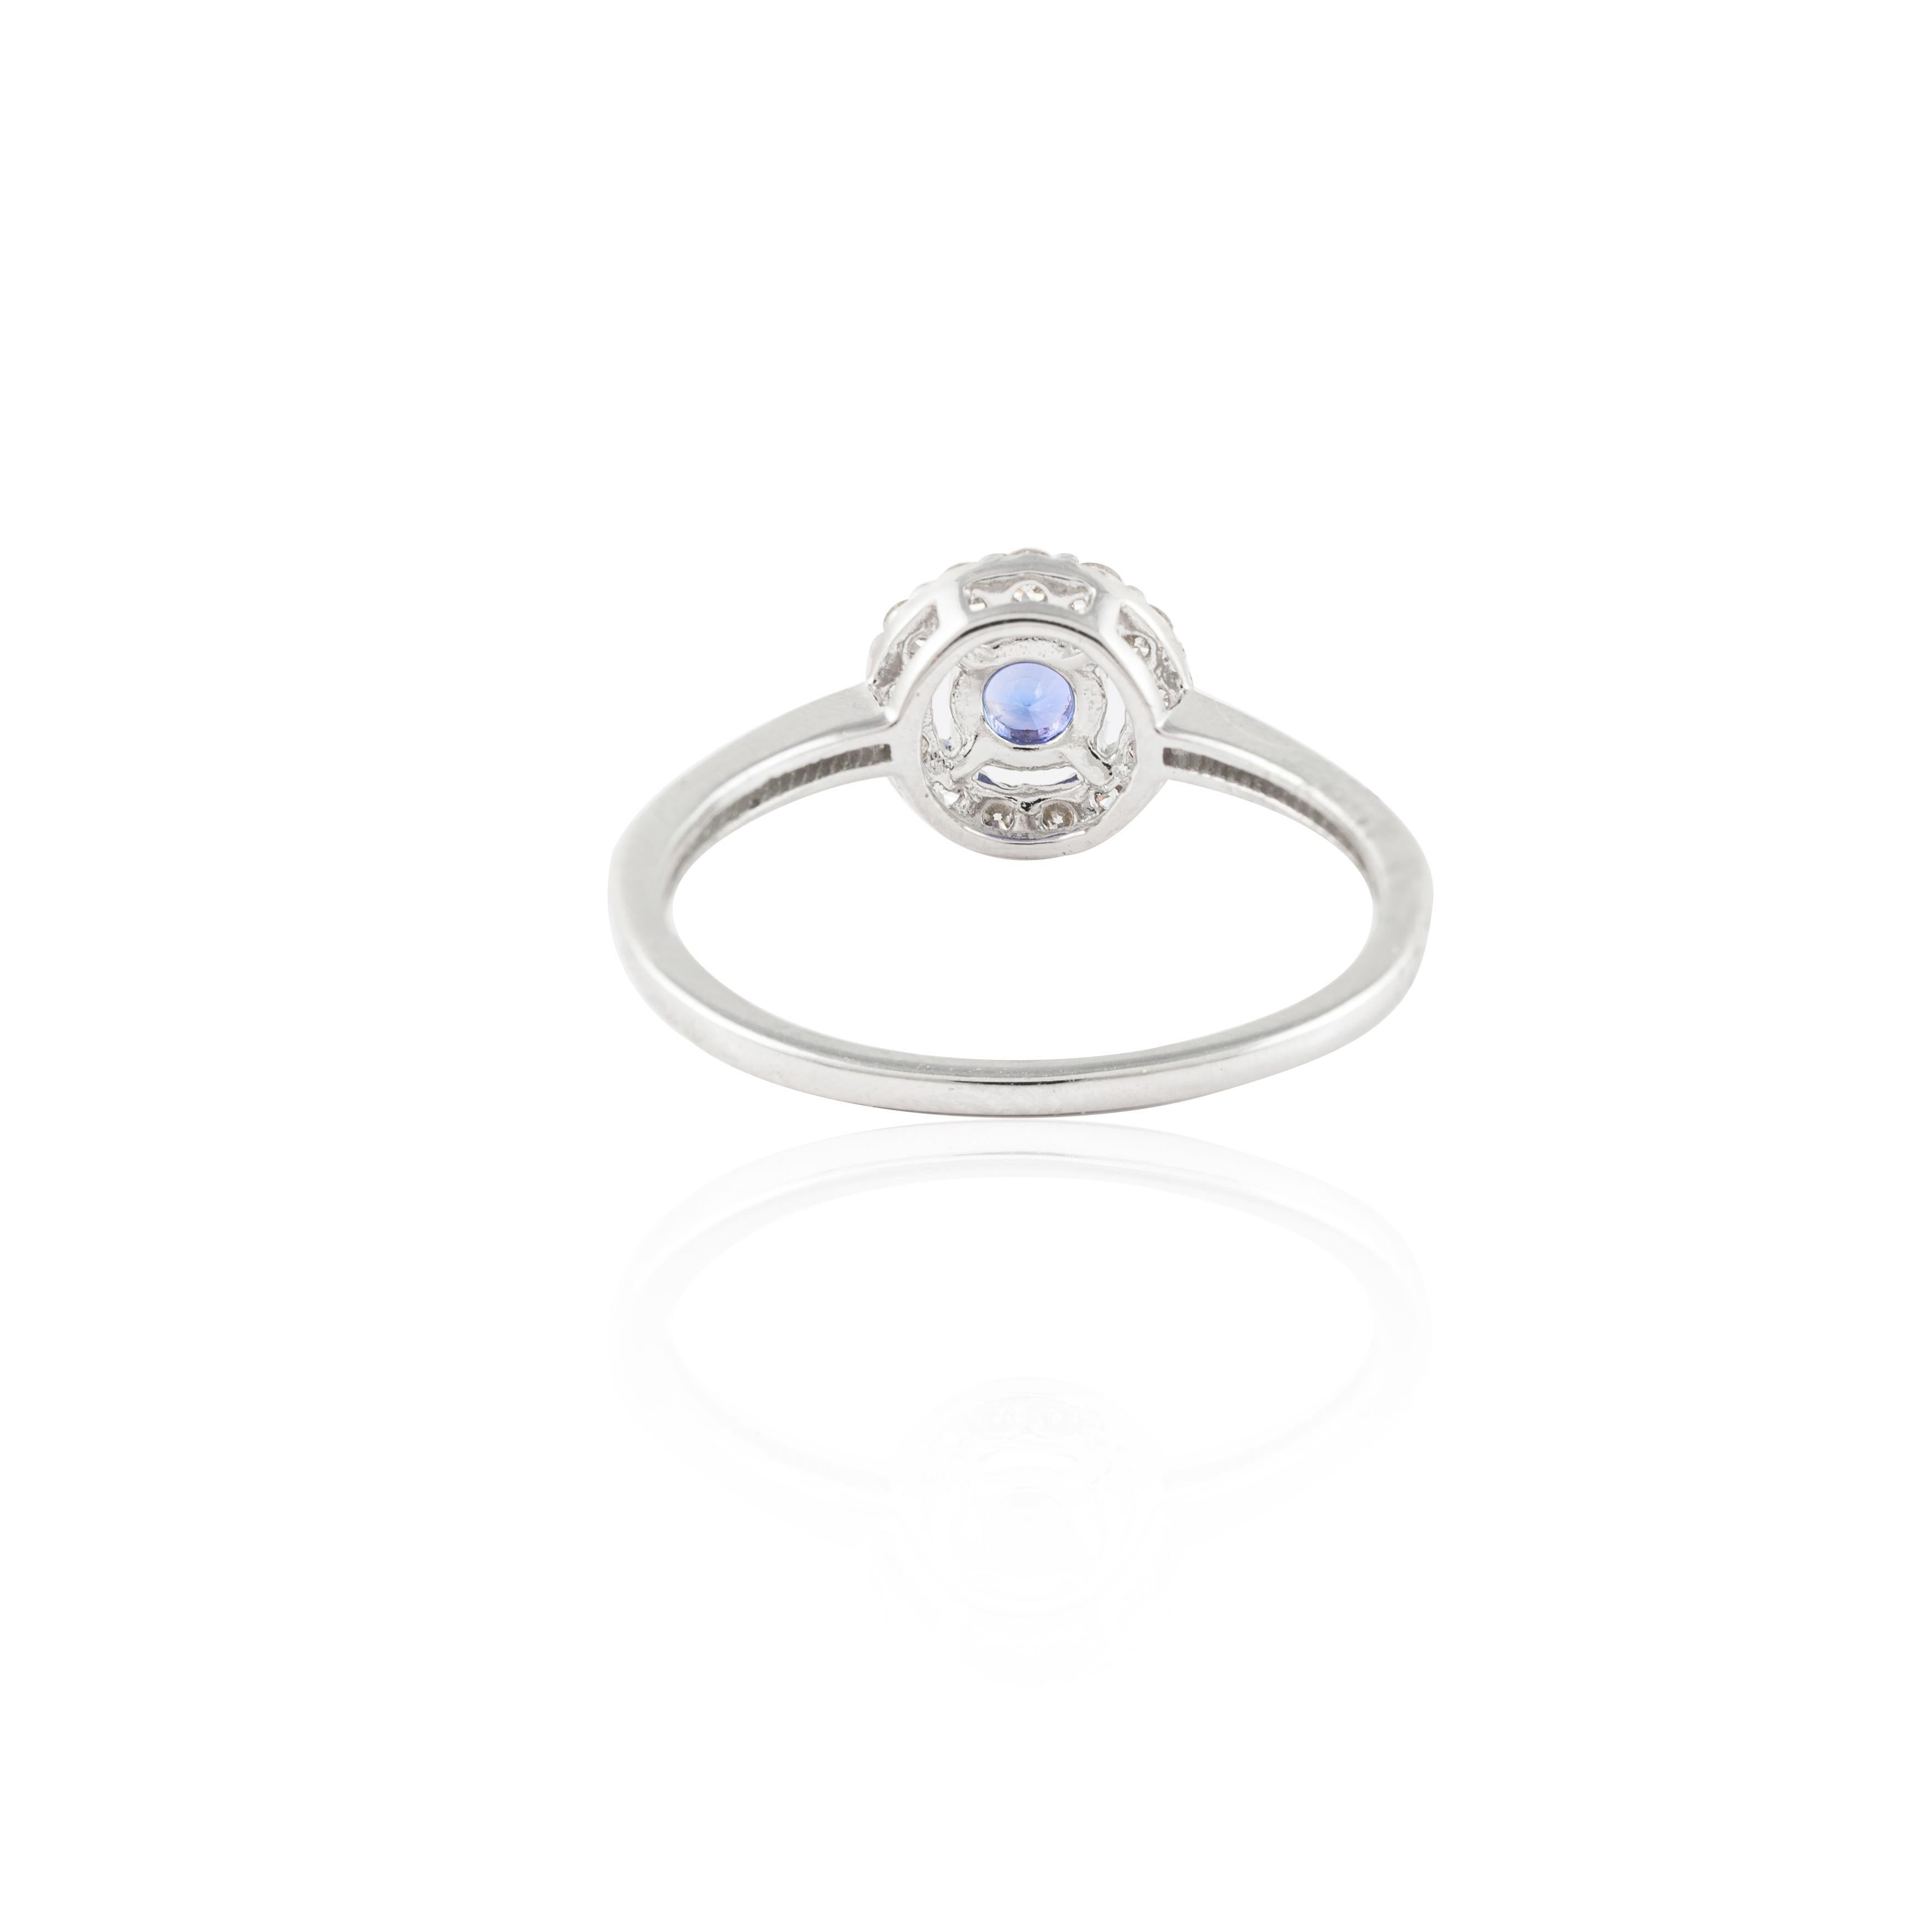 For Sale:  14K Solid White Gold Classic Round Blue Sapphire Ring with Halo Diamonds 6